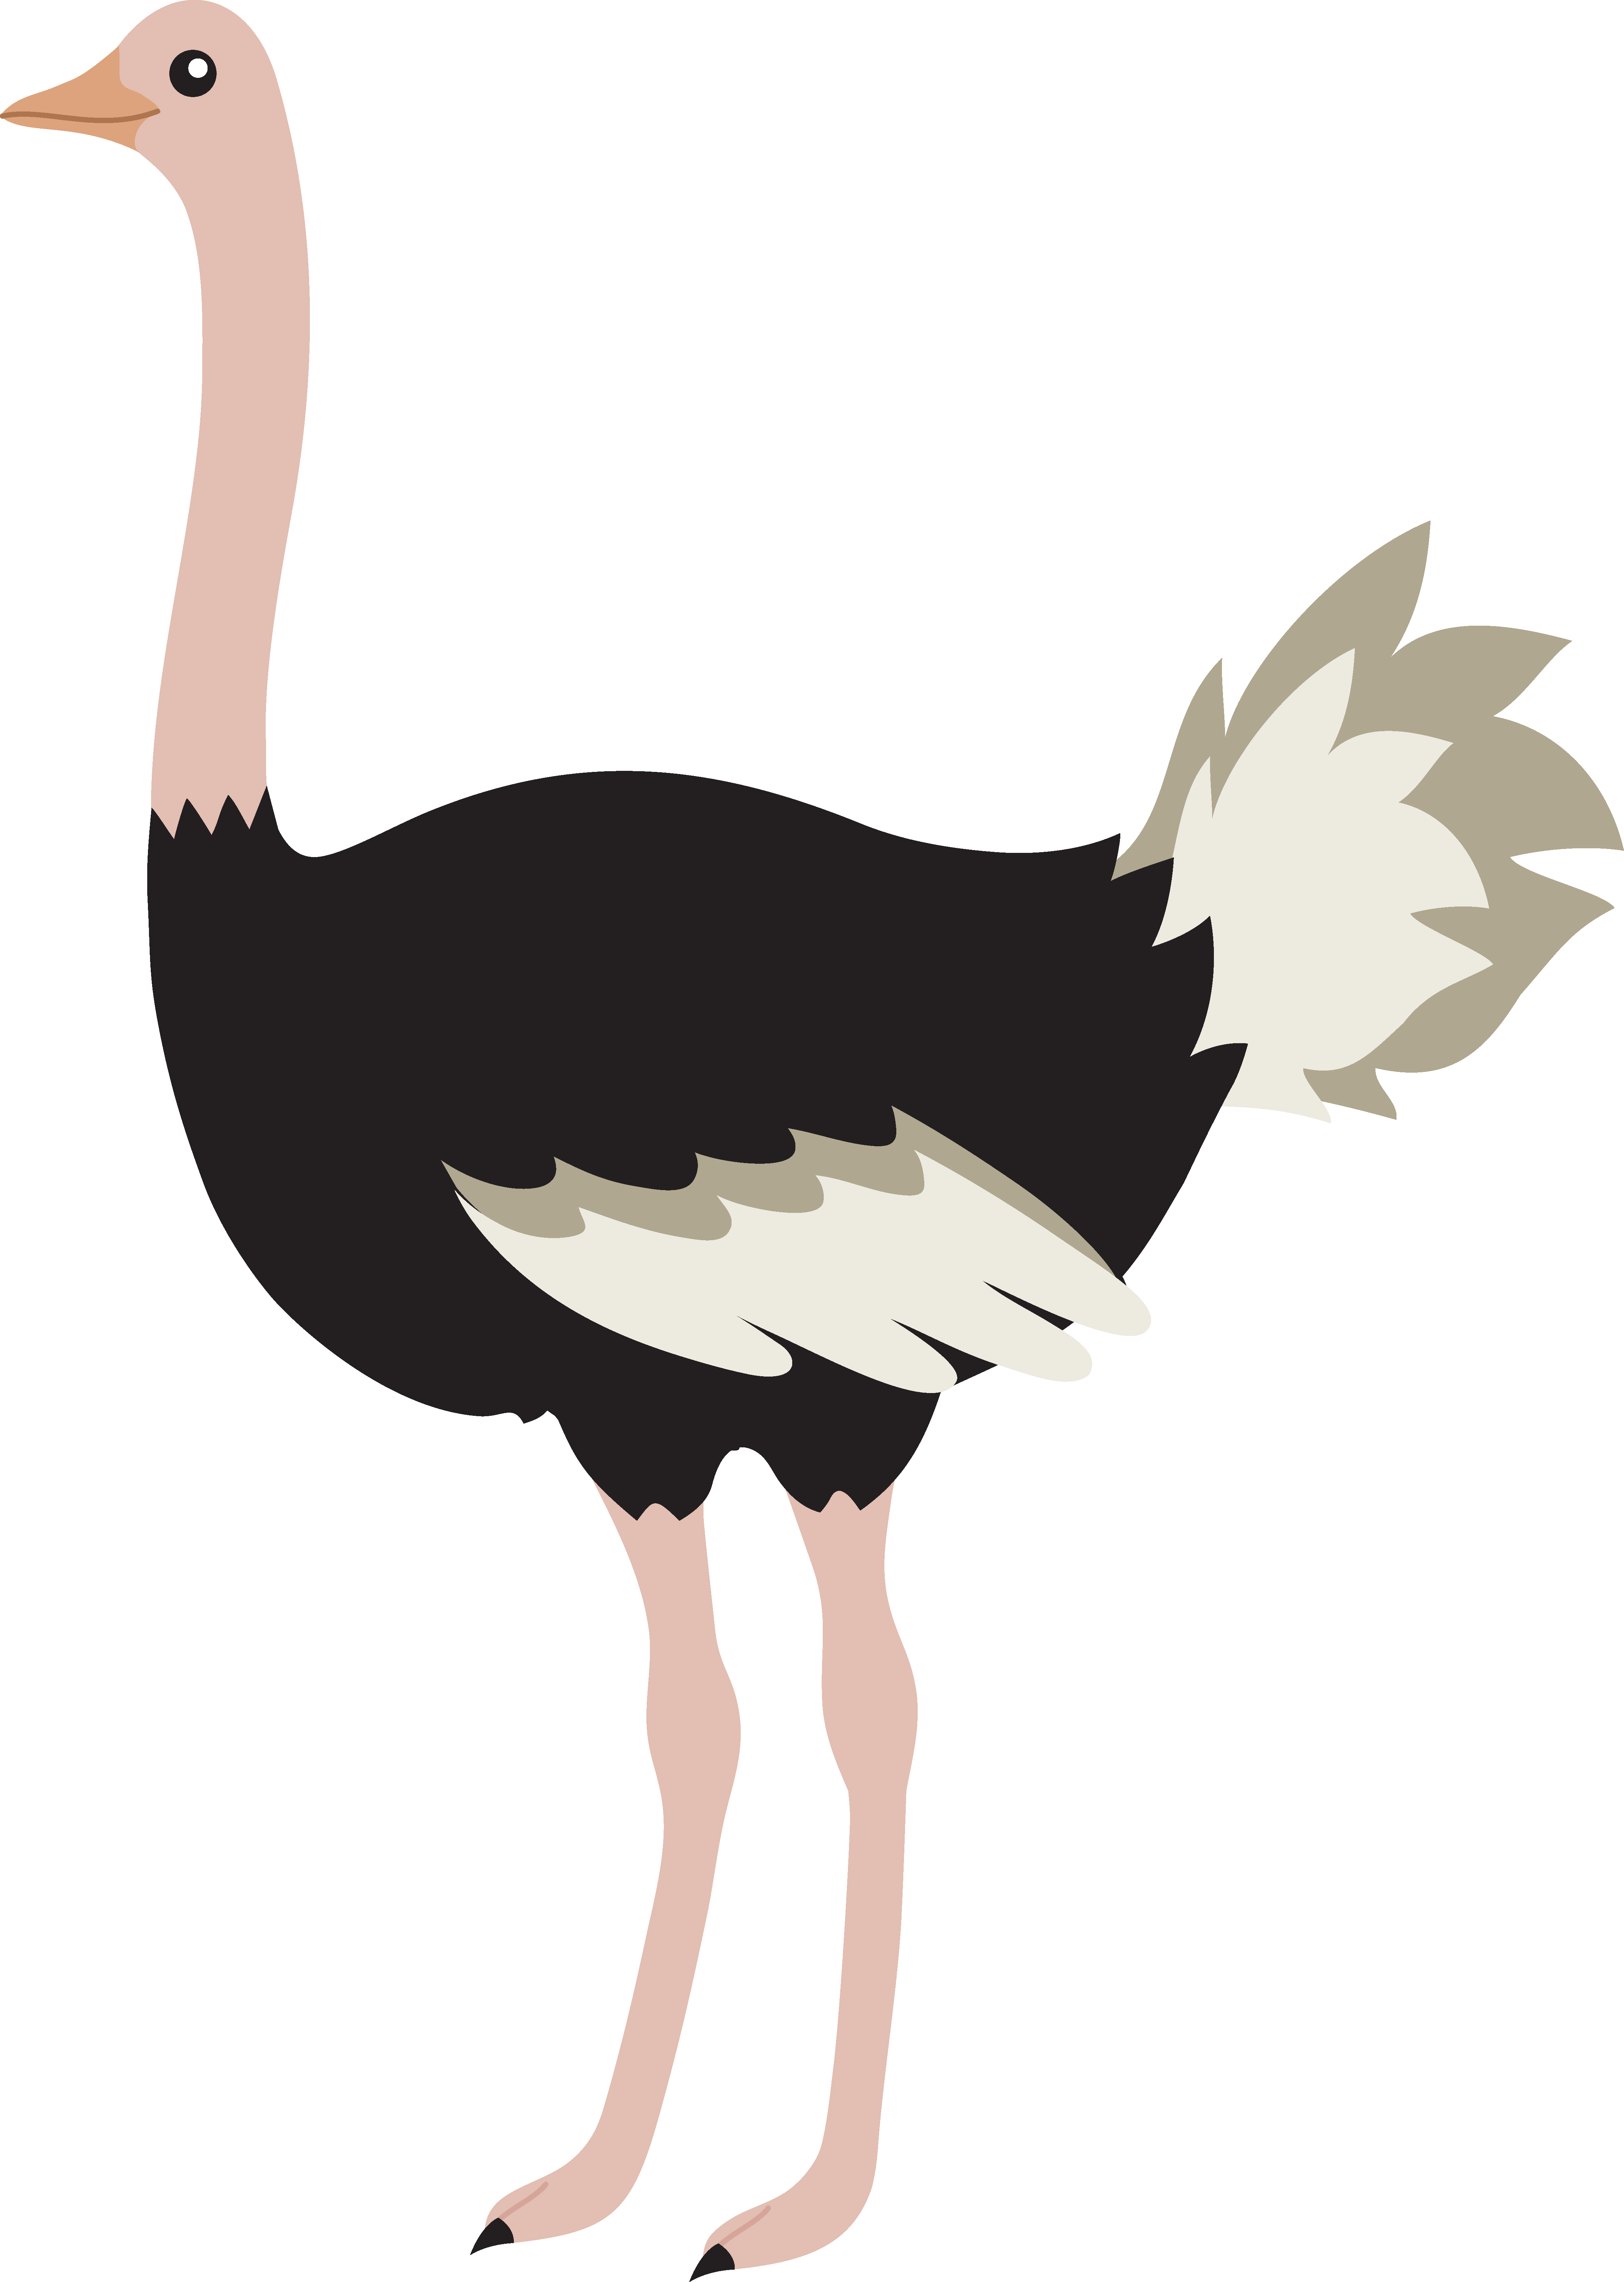 Cute Cartoon Ostrich Images  Pictures - Becuo